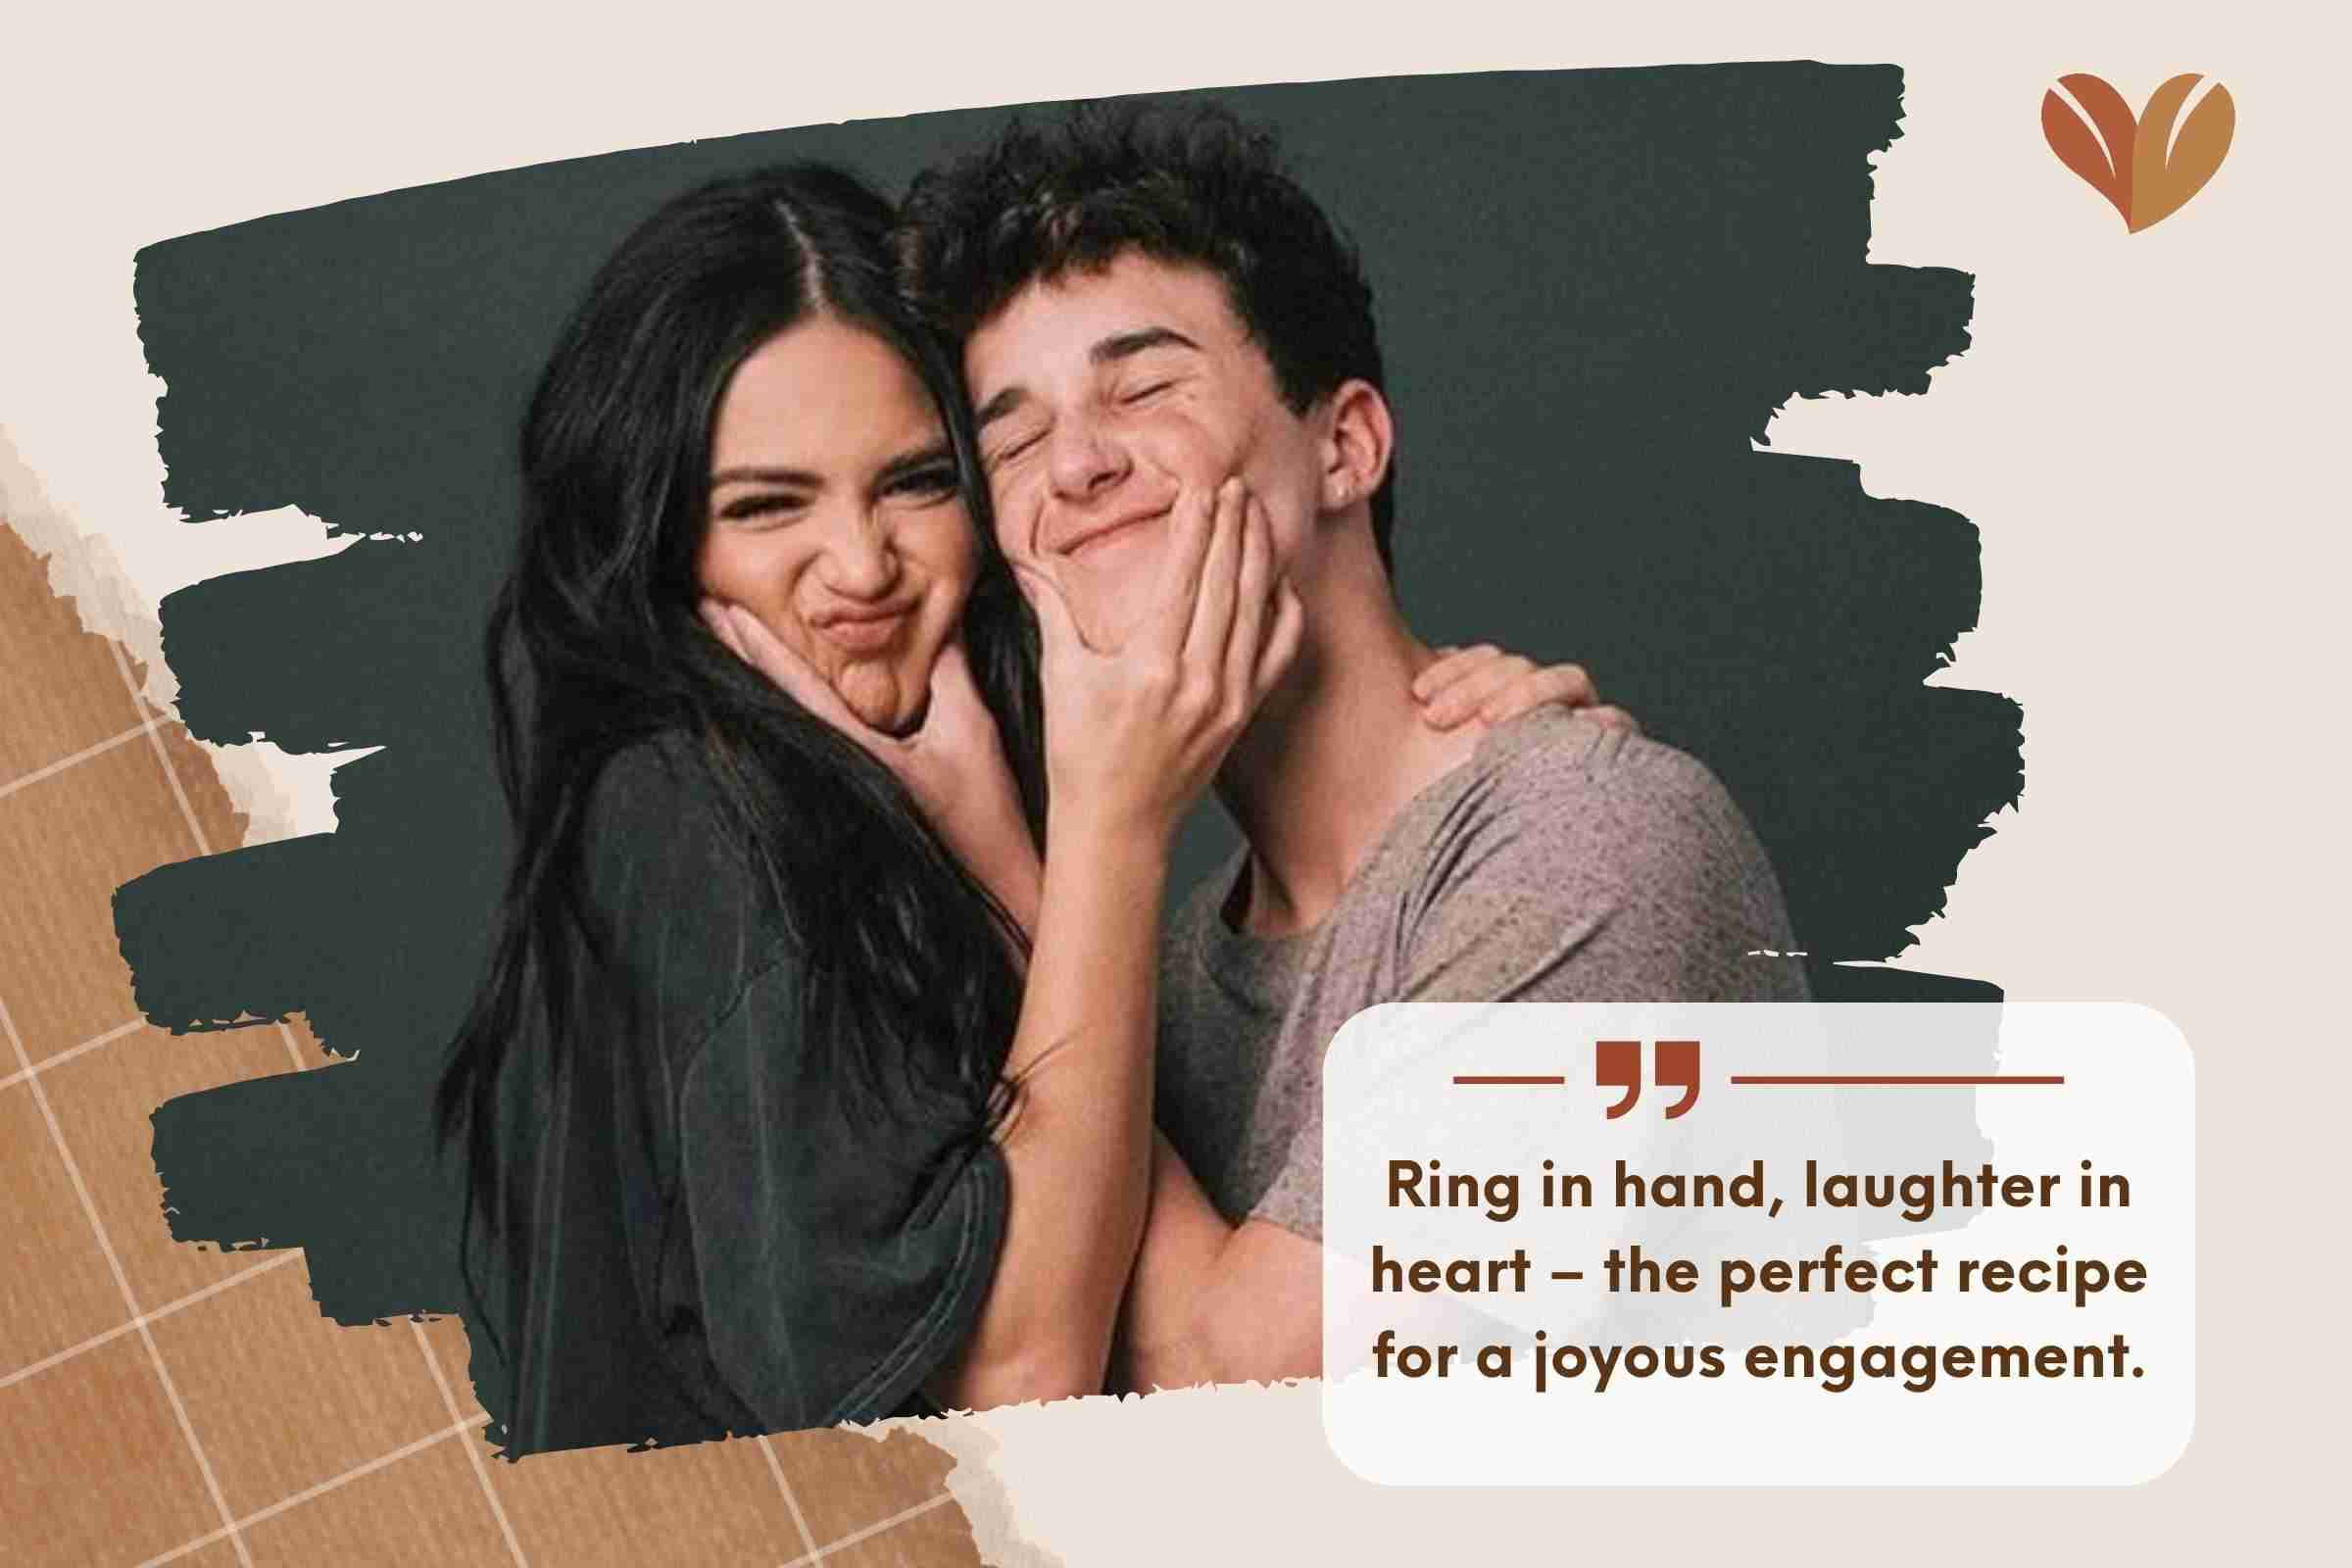 Ring in hand, laughter in heart – the perfect recipe for a joyous engagement.